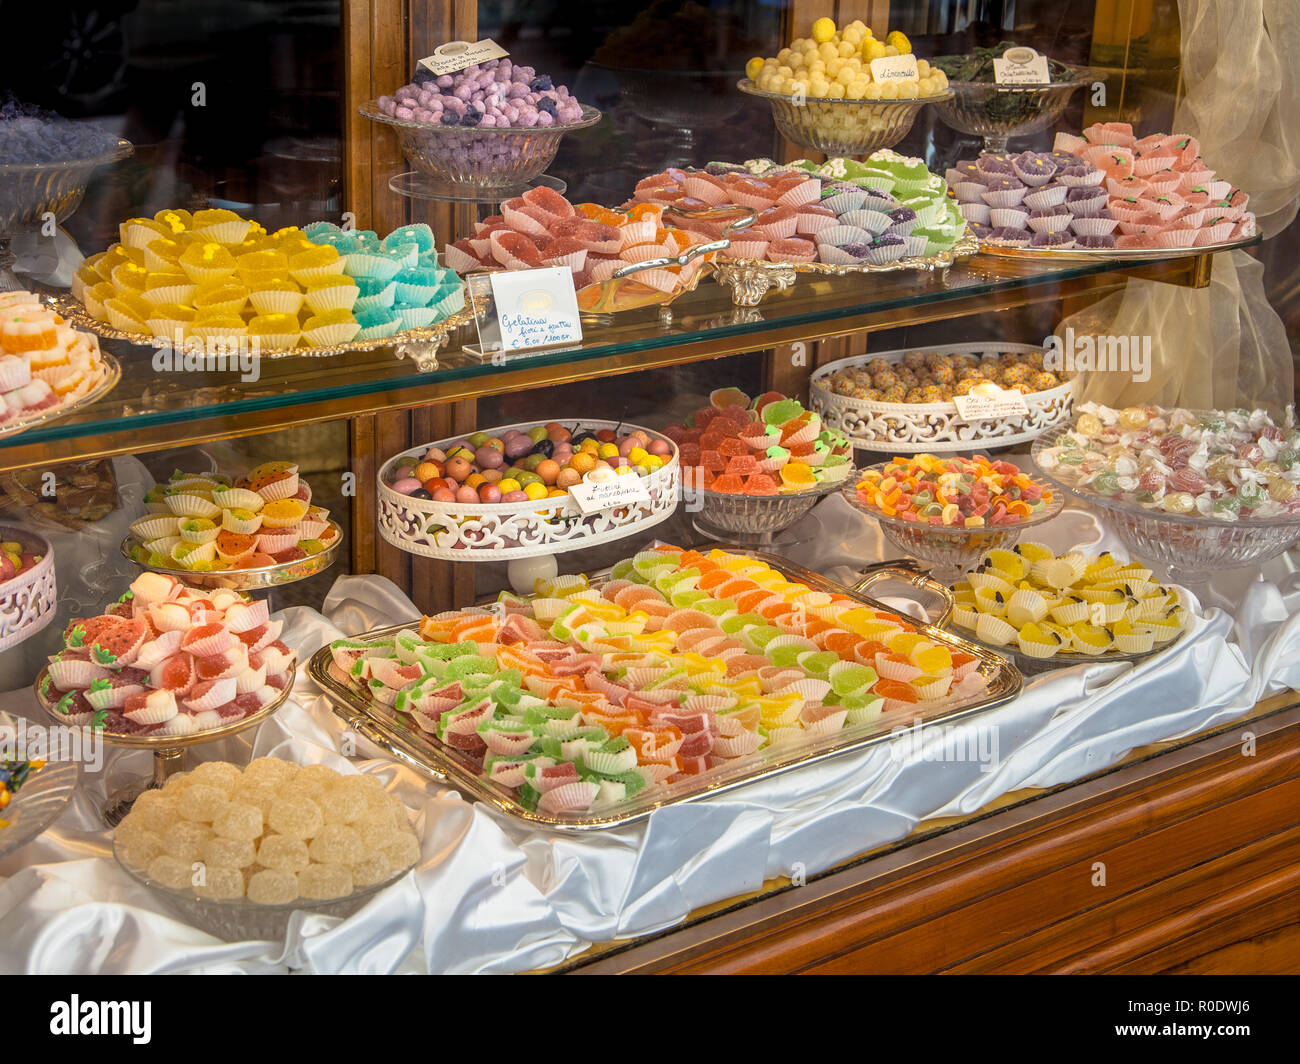 Show Case of a Patisserie with Pastry on Display Stock Photo